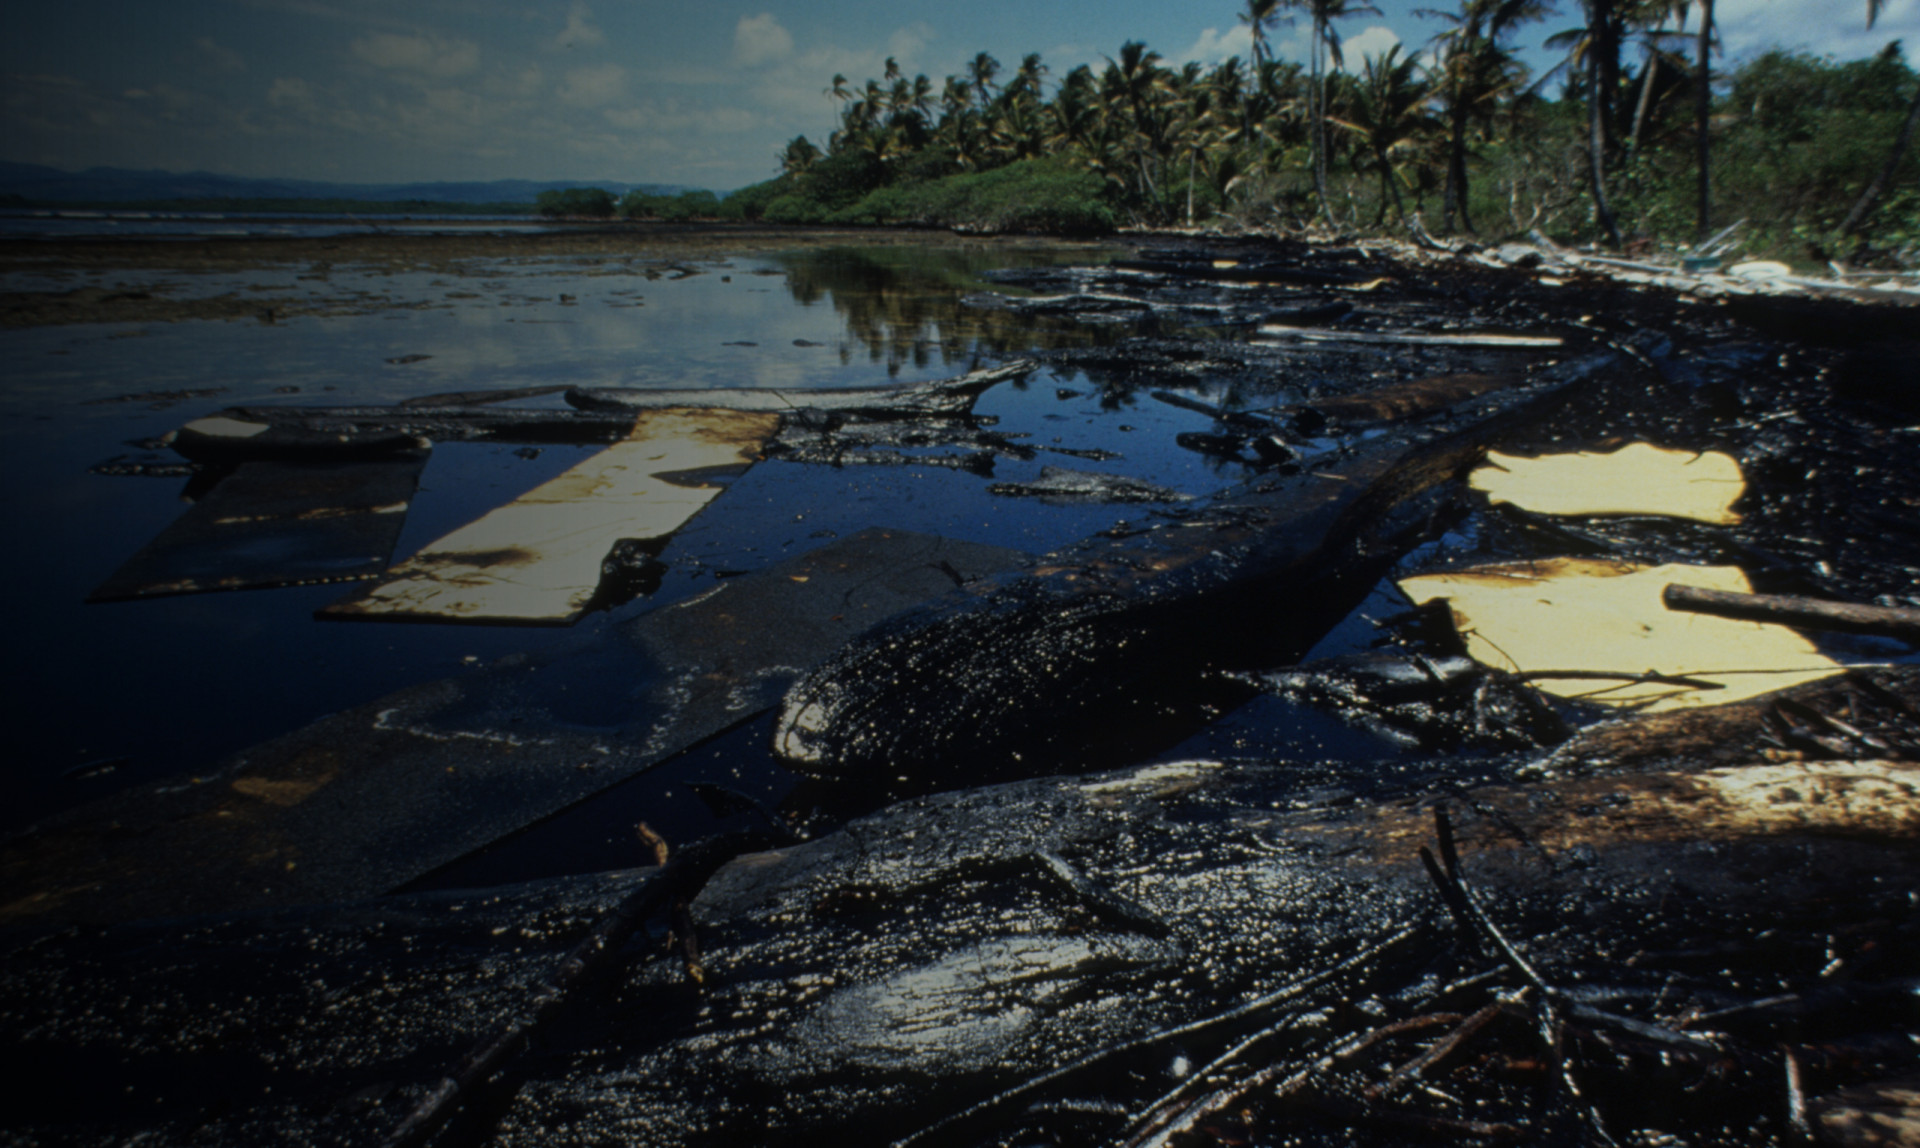 The breakup of the tanker Witwater spilled 14,000 barrels of diesel oil and Bunker C near Galeta. Eighteen years later, 75,000 barrels of crude oil spills was spilled near the station